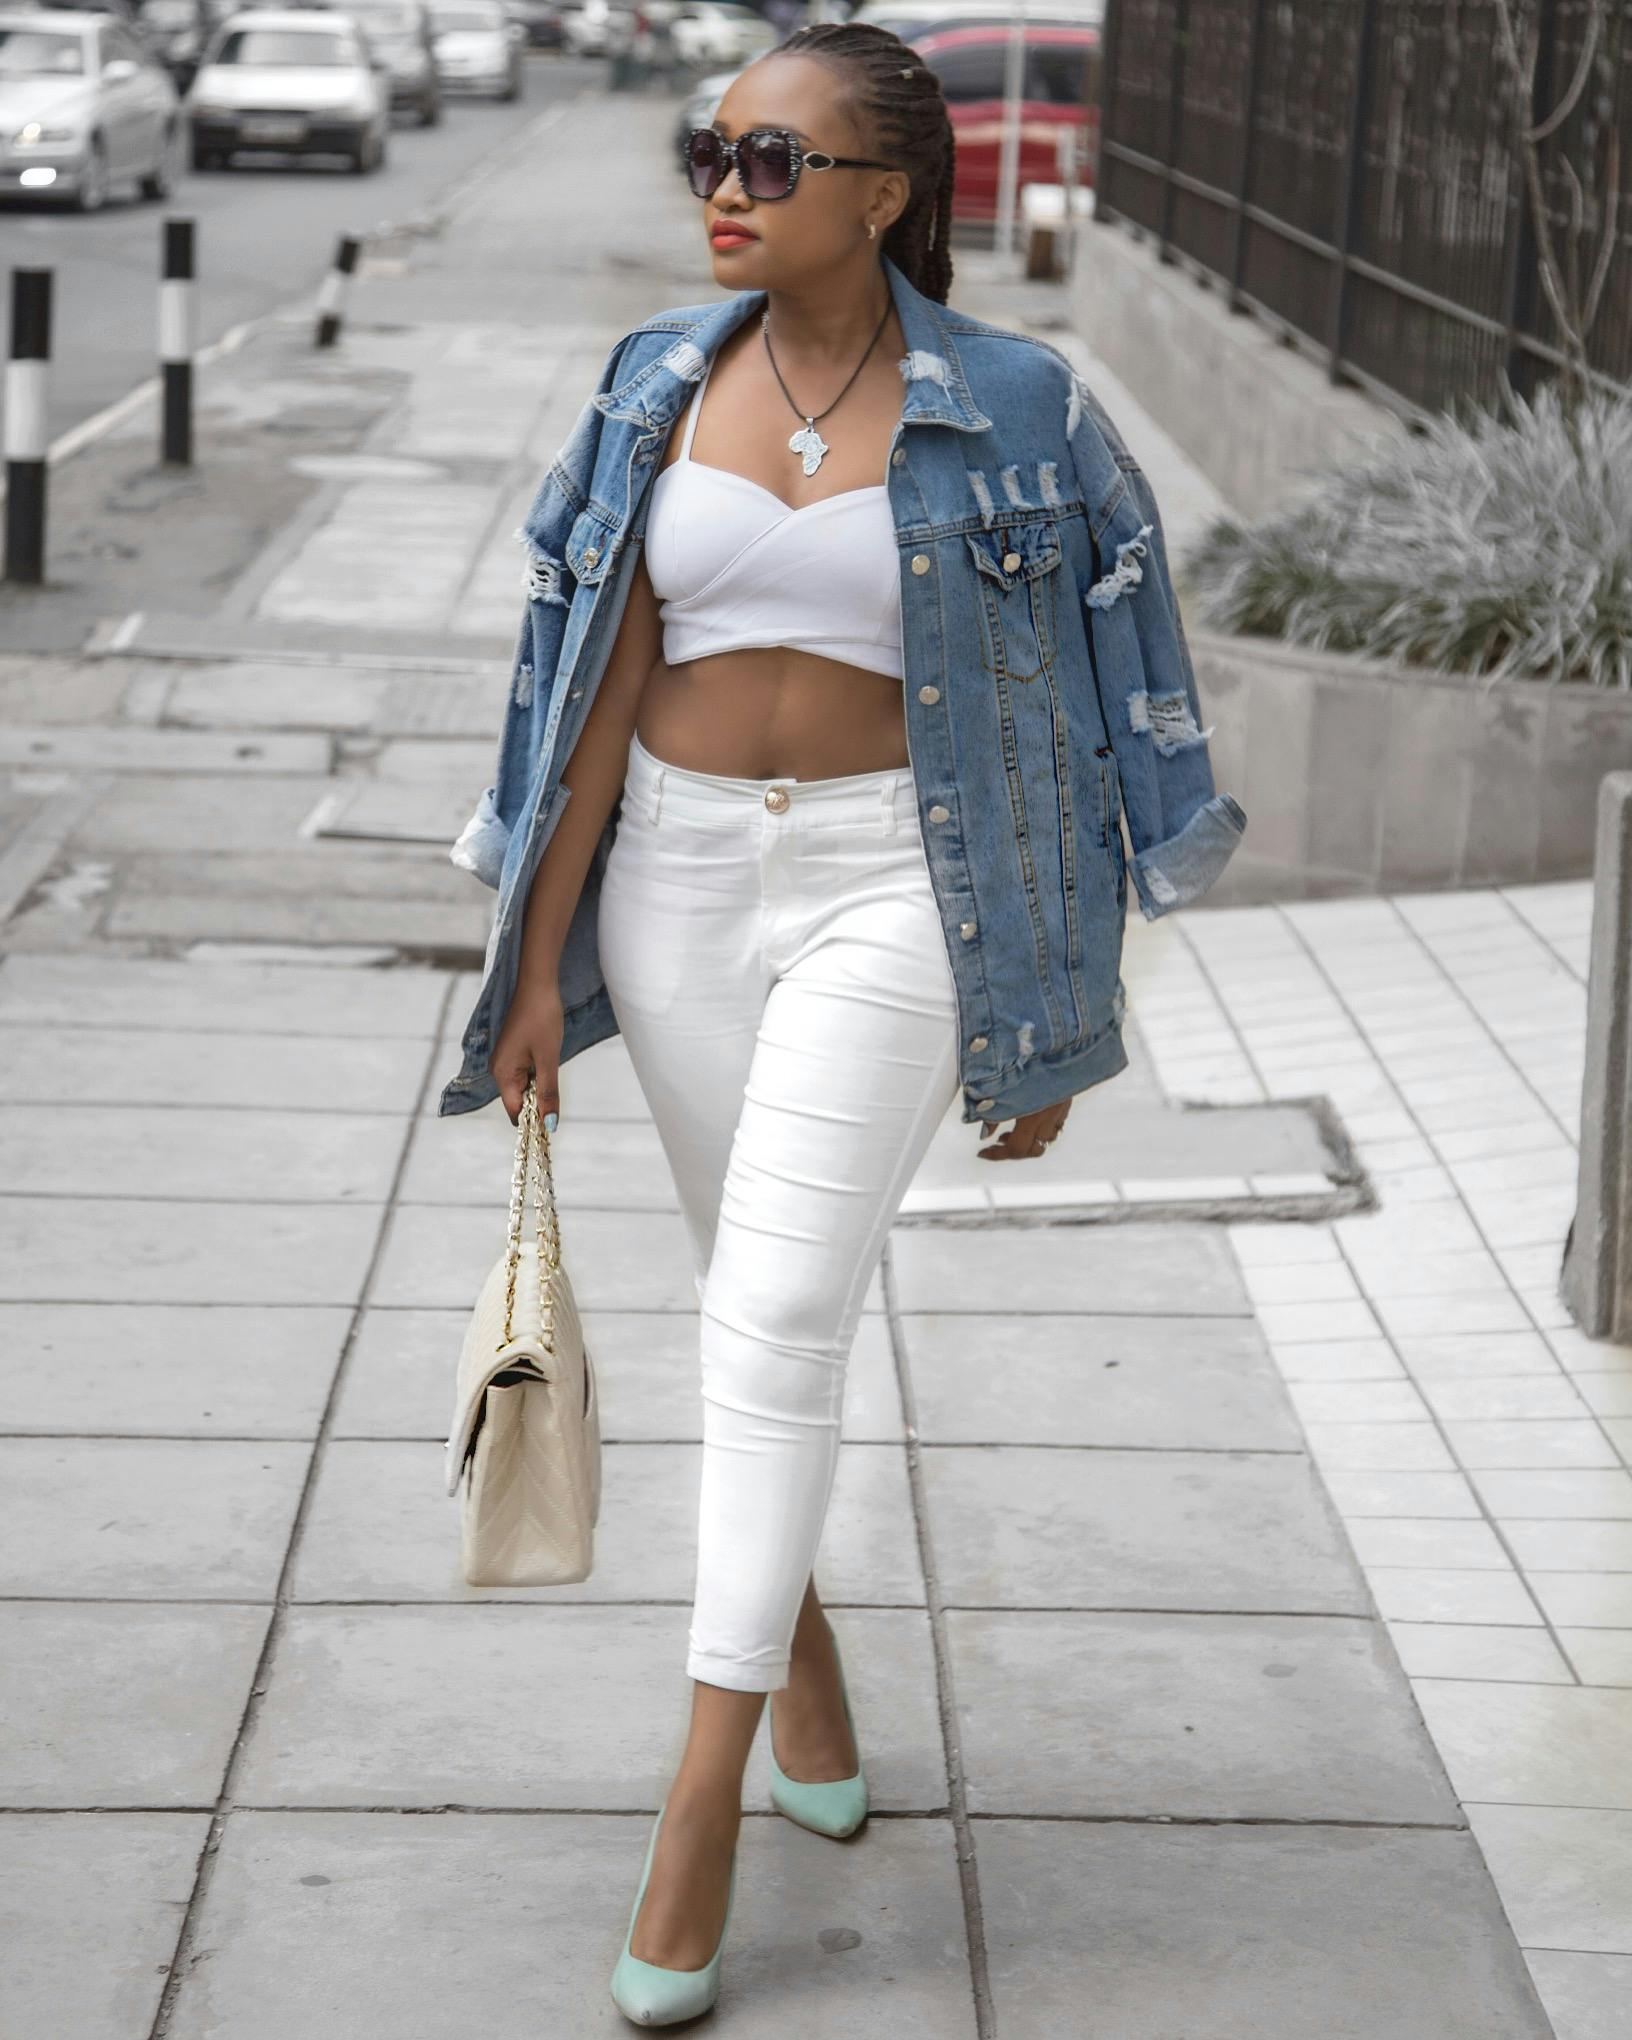 Photo of Woman Wearing White Crop Top and Denim Jacket Walking in Pavement Holding Bag